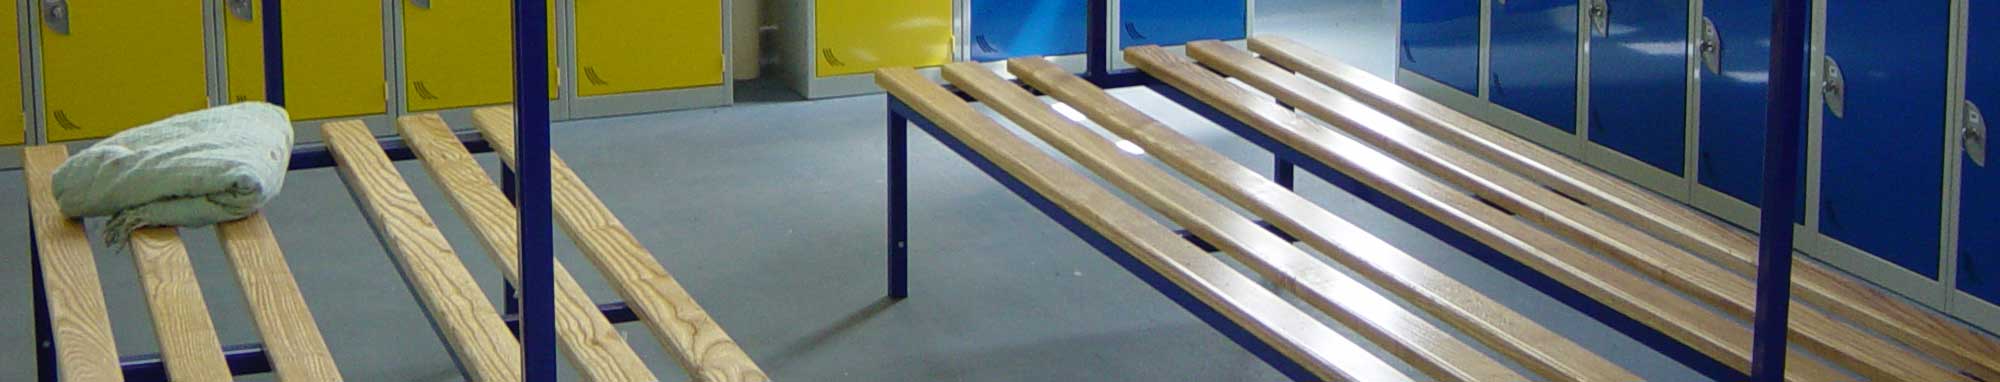 Cloakroom Benches